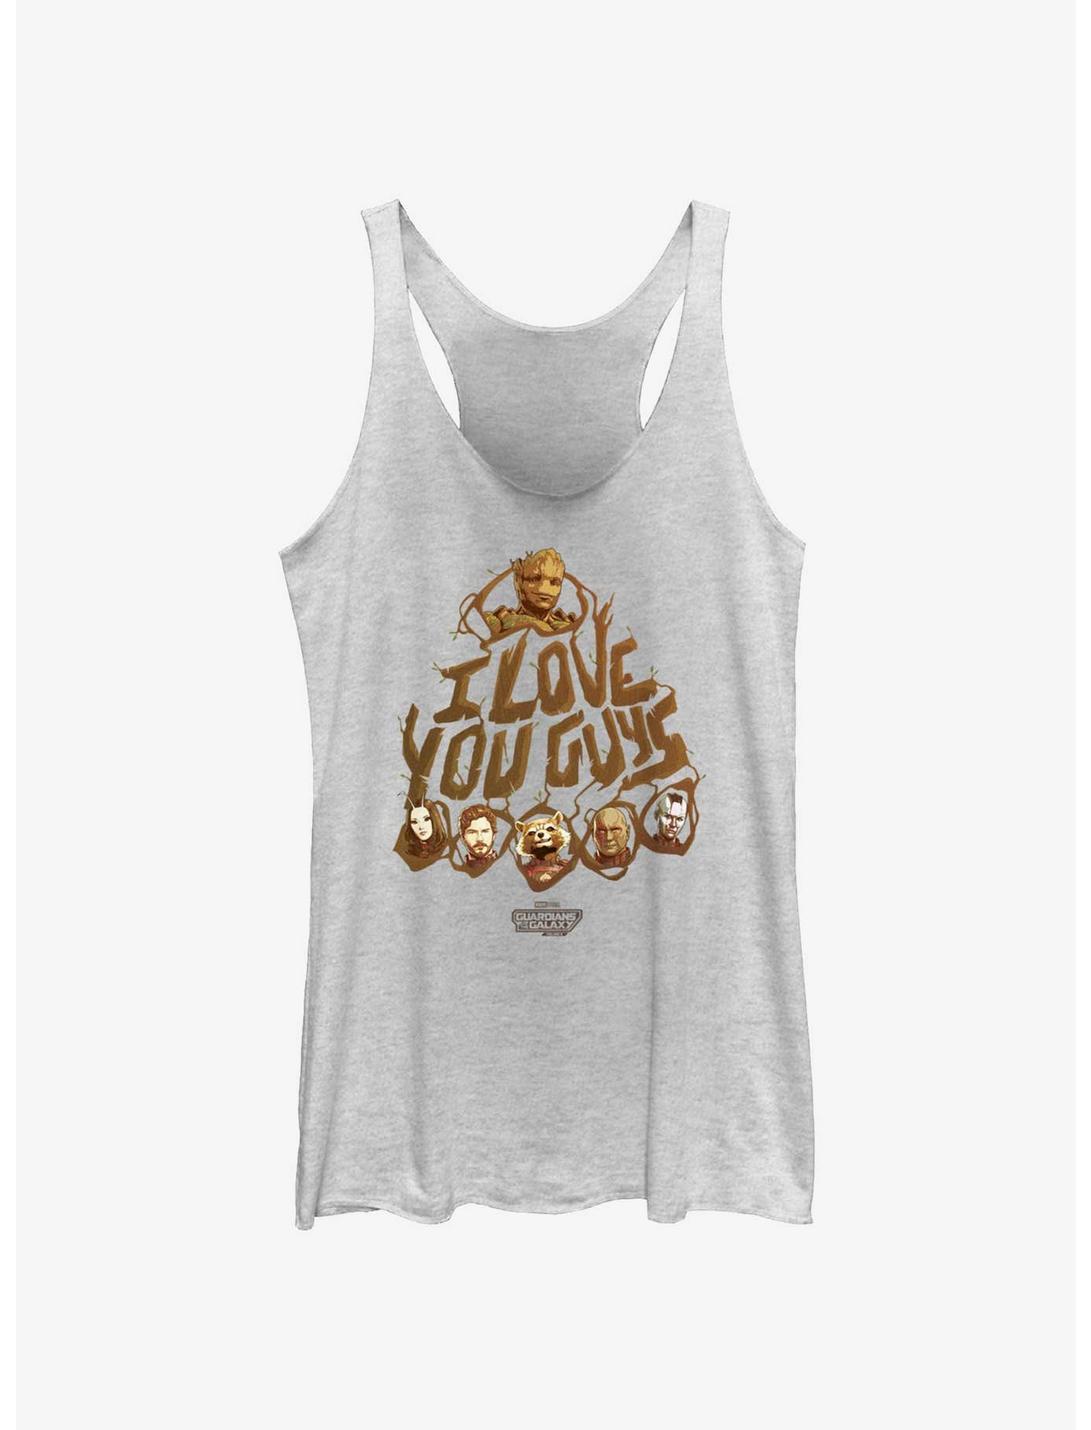 Guardians Of The Galaxy Vol. 3 Love You Guys Girls Tank, WHITE HTR, hi-res